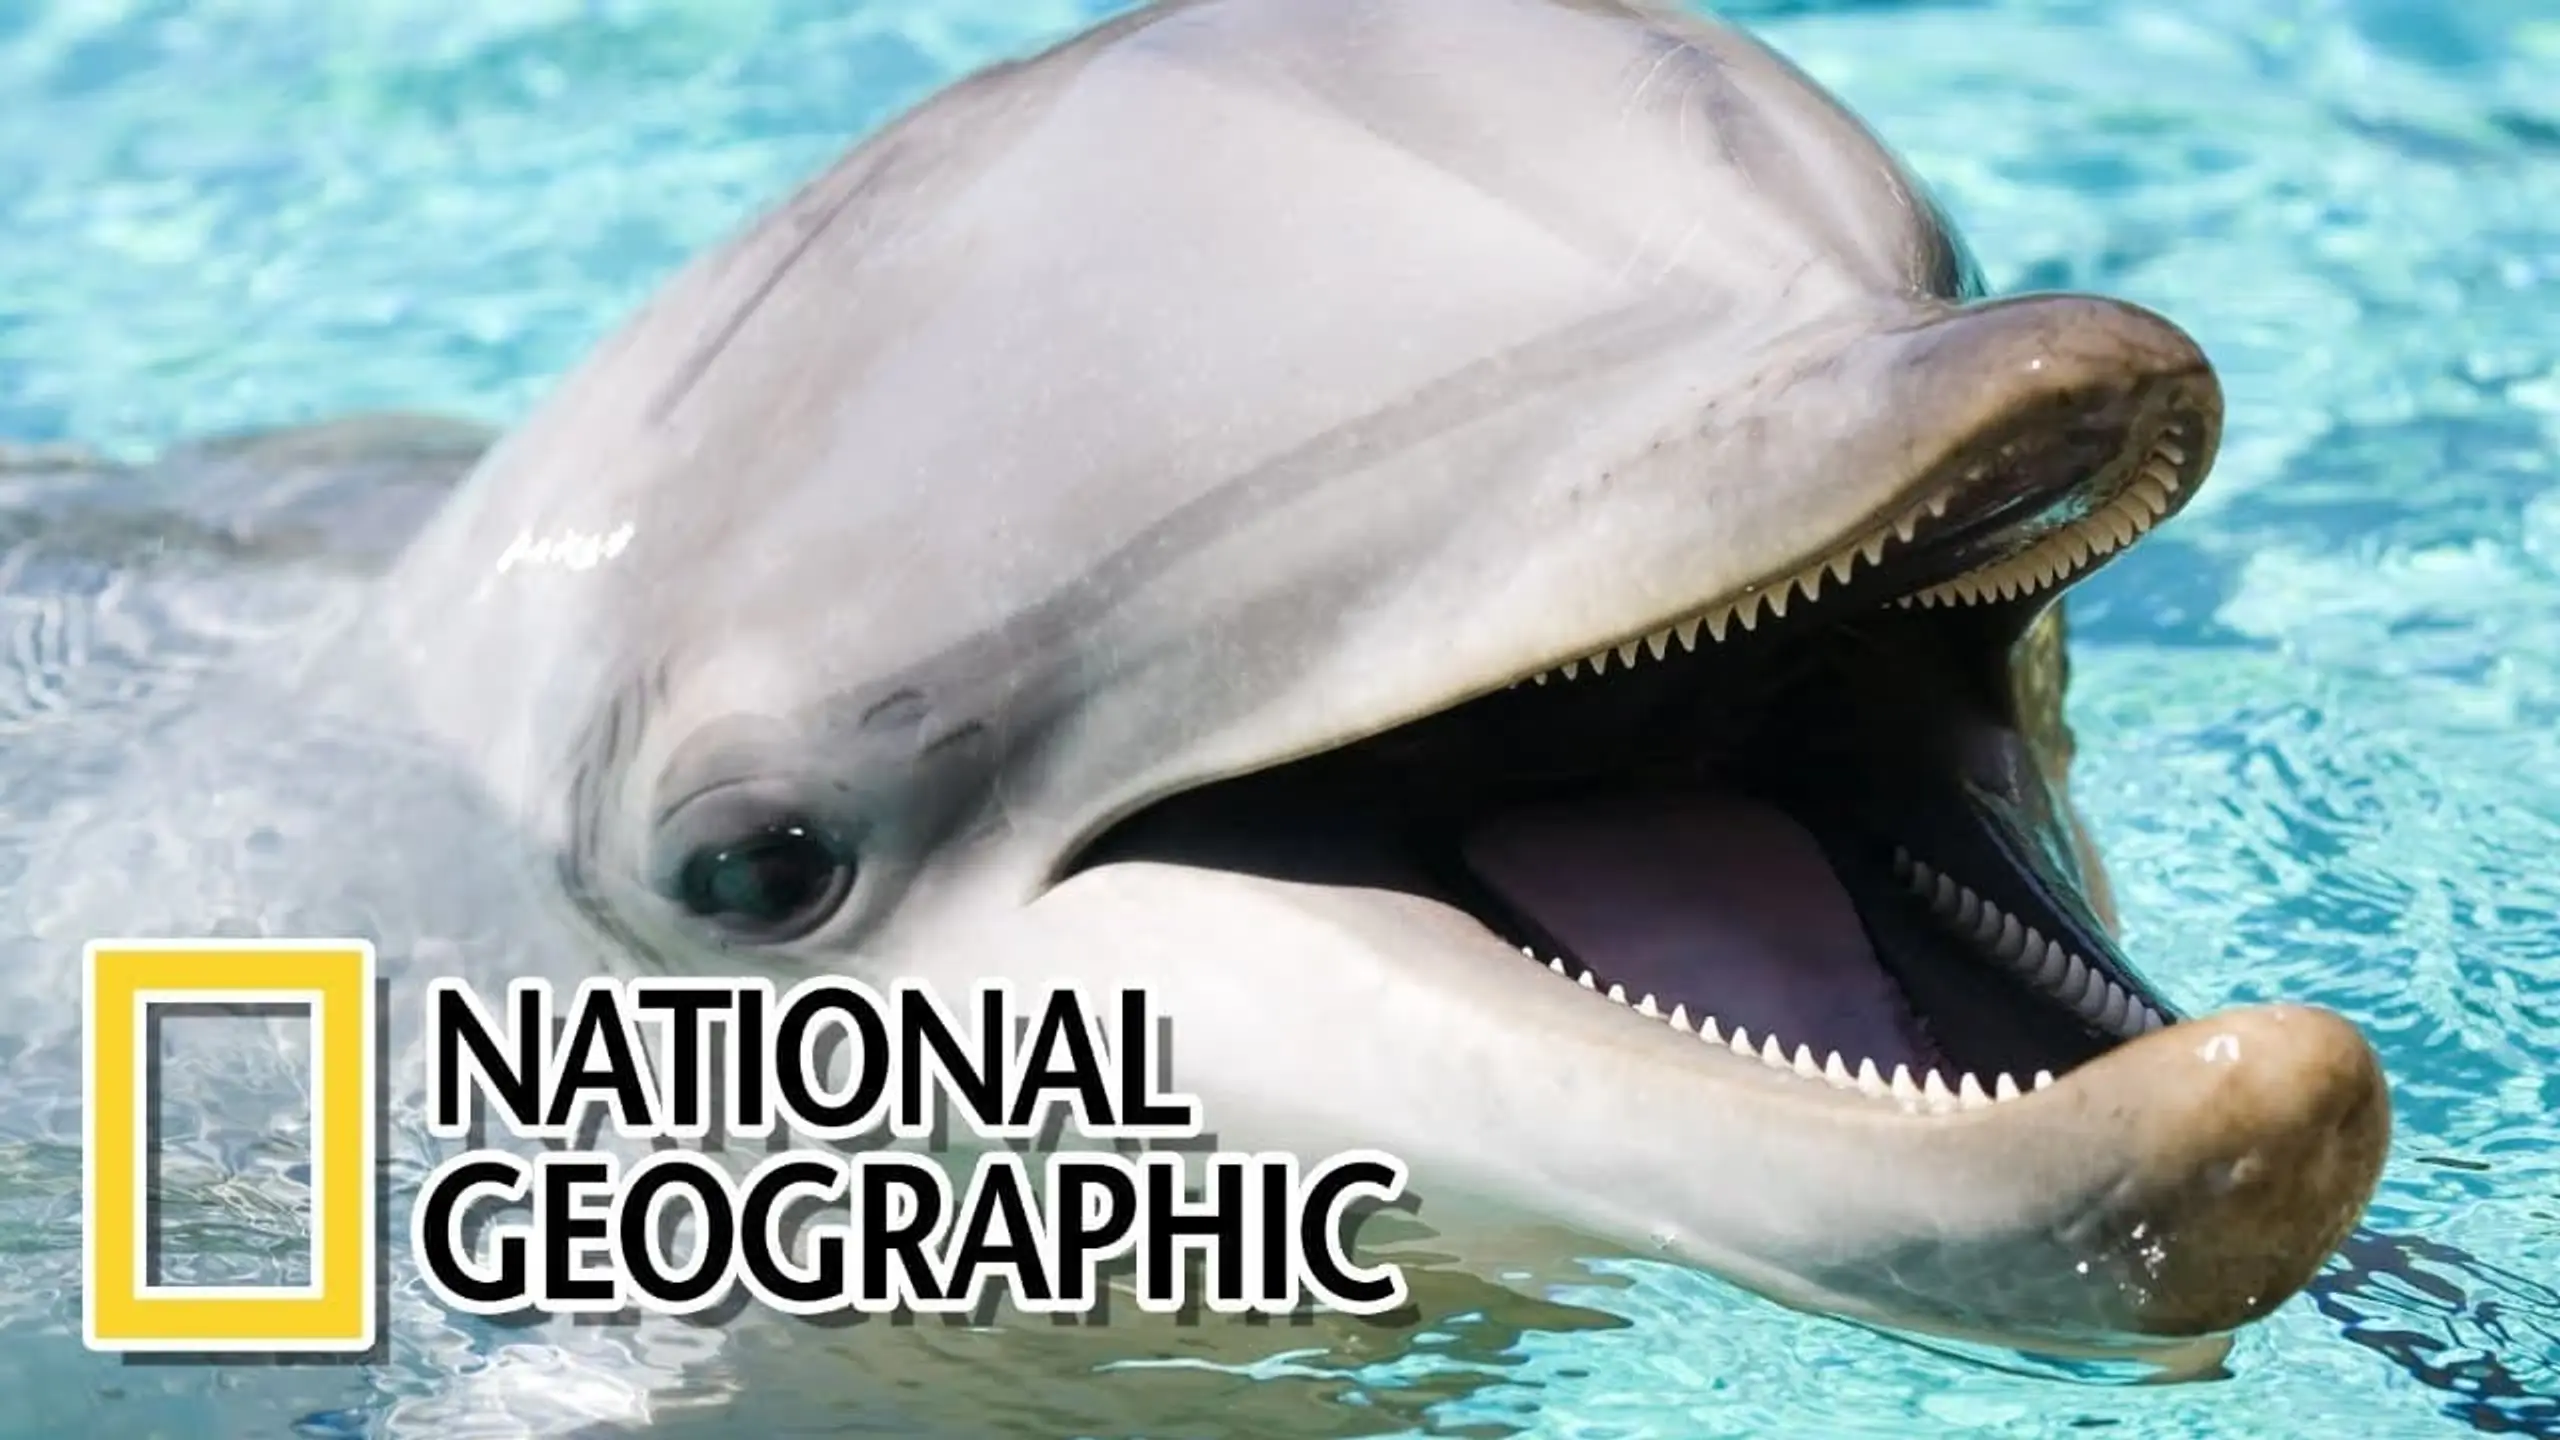 National Geographic's Dolphins: The Wild Side